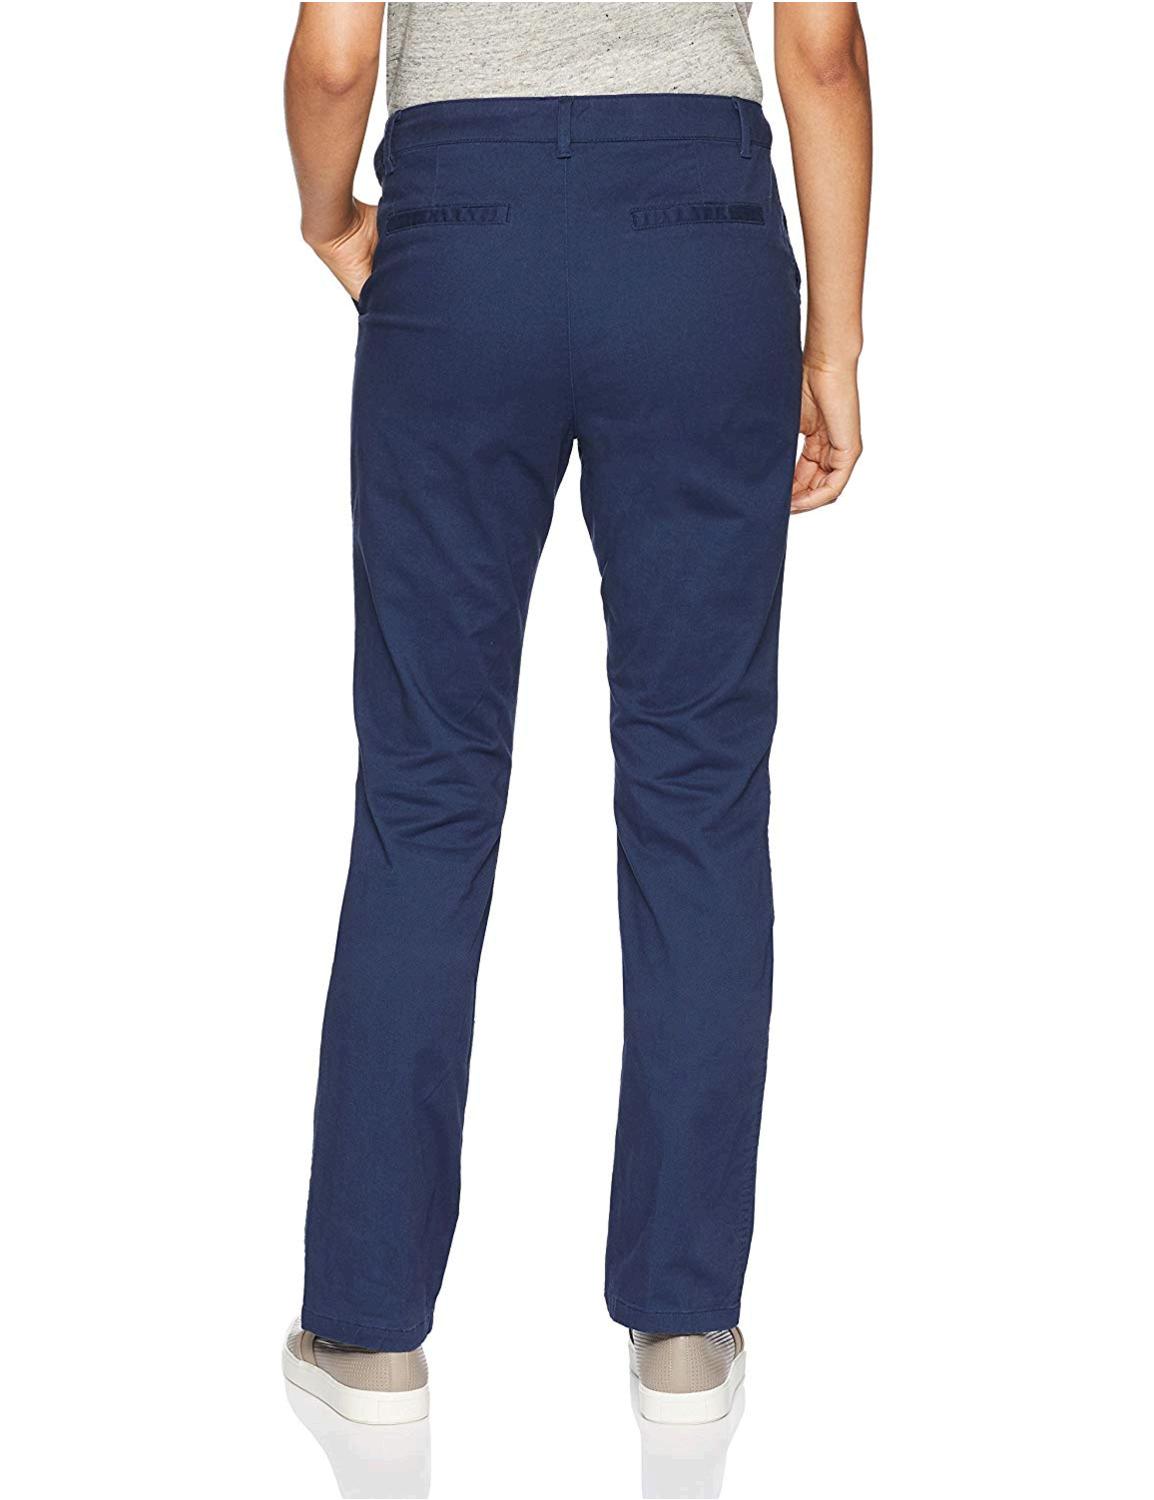 Essentials Women's Straight-Fit Stretch Twill Chino Pant,, Navy, Size 6.0 191770287620 | eBay